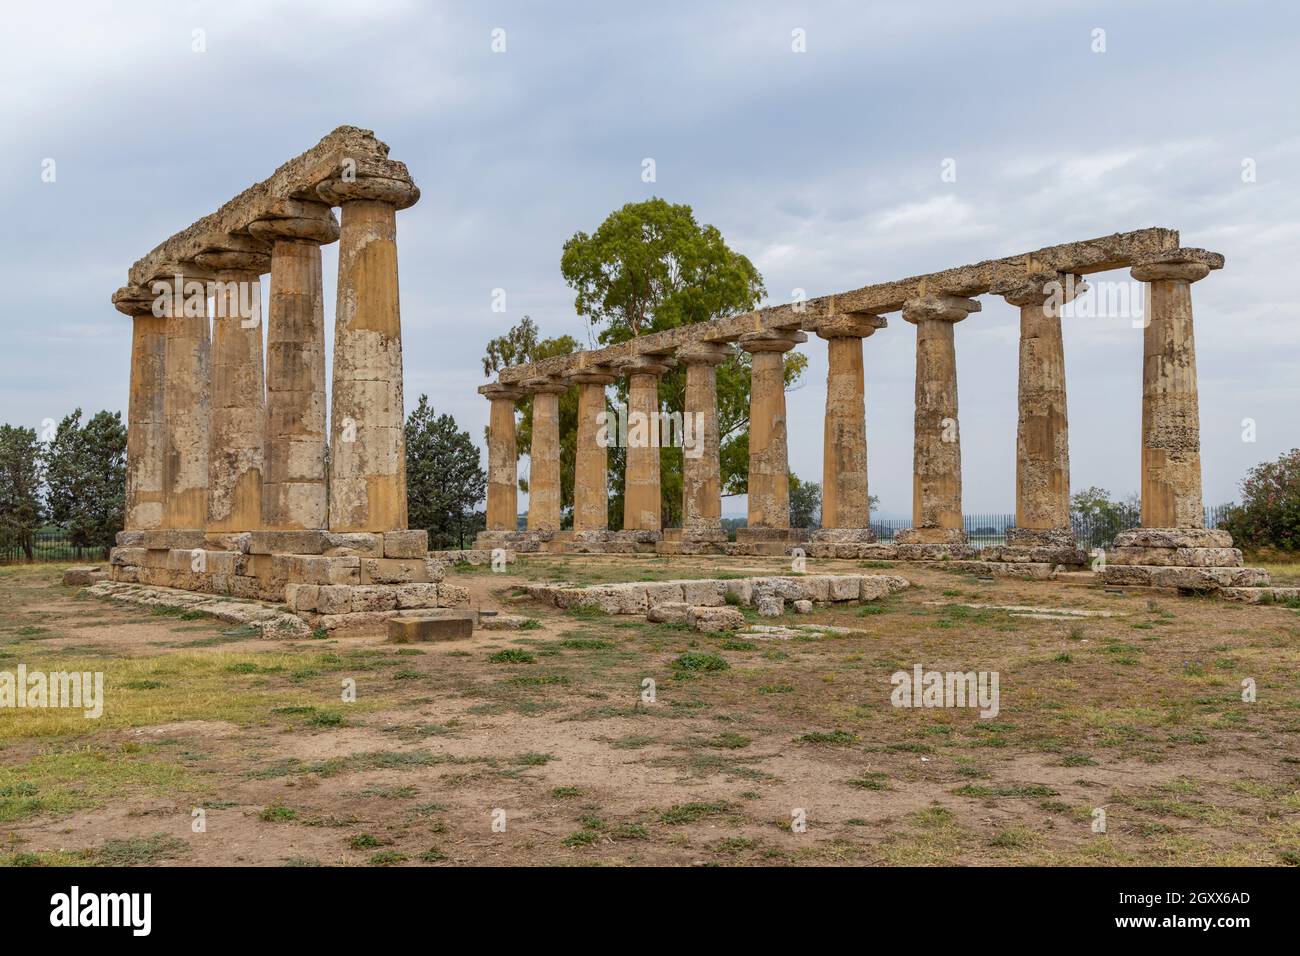 Temple of Hera from 6 century BC, archaeological site near Bernalda, Italy Stock Photo